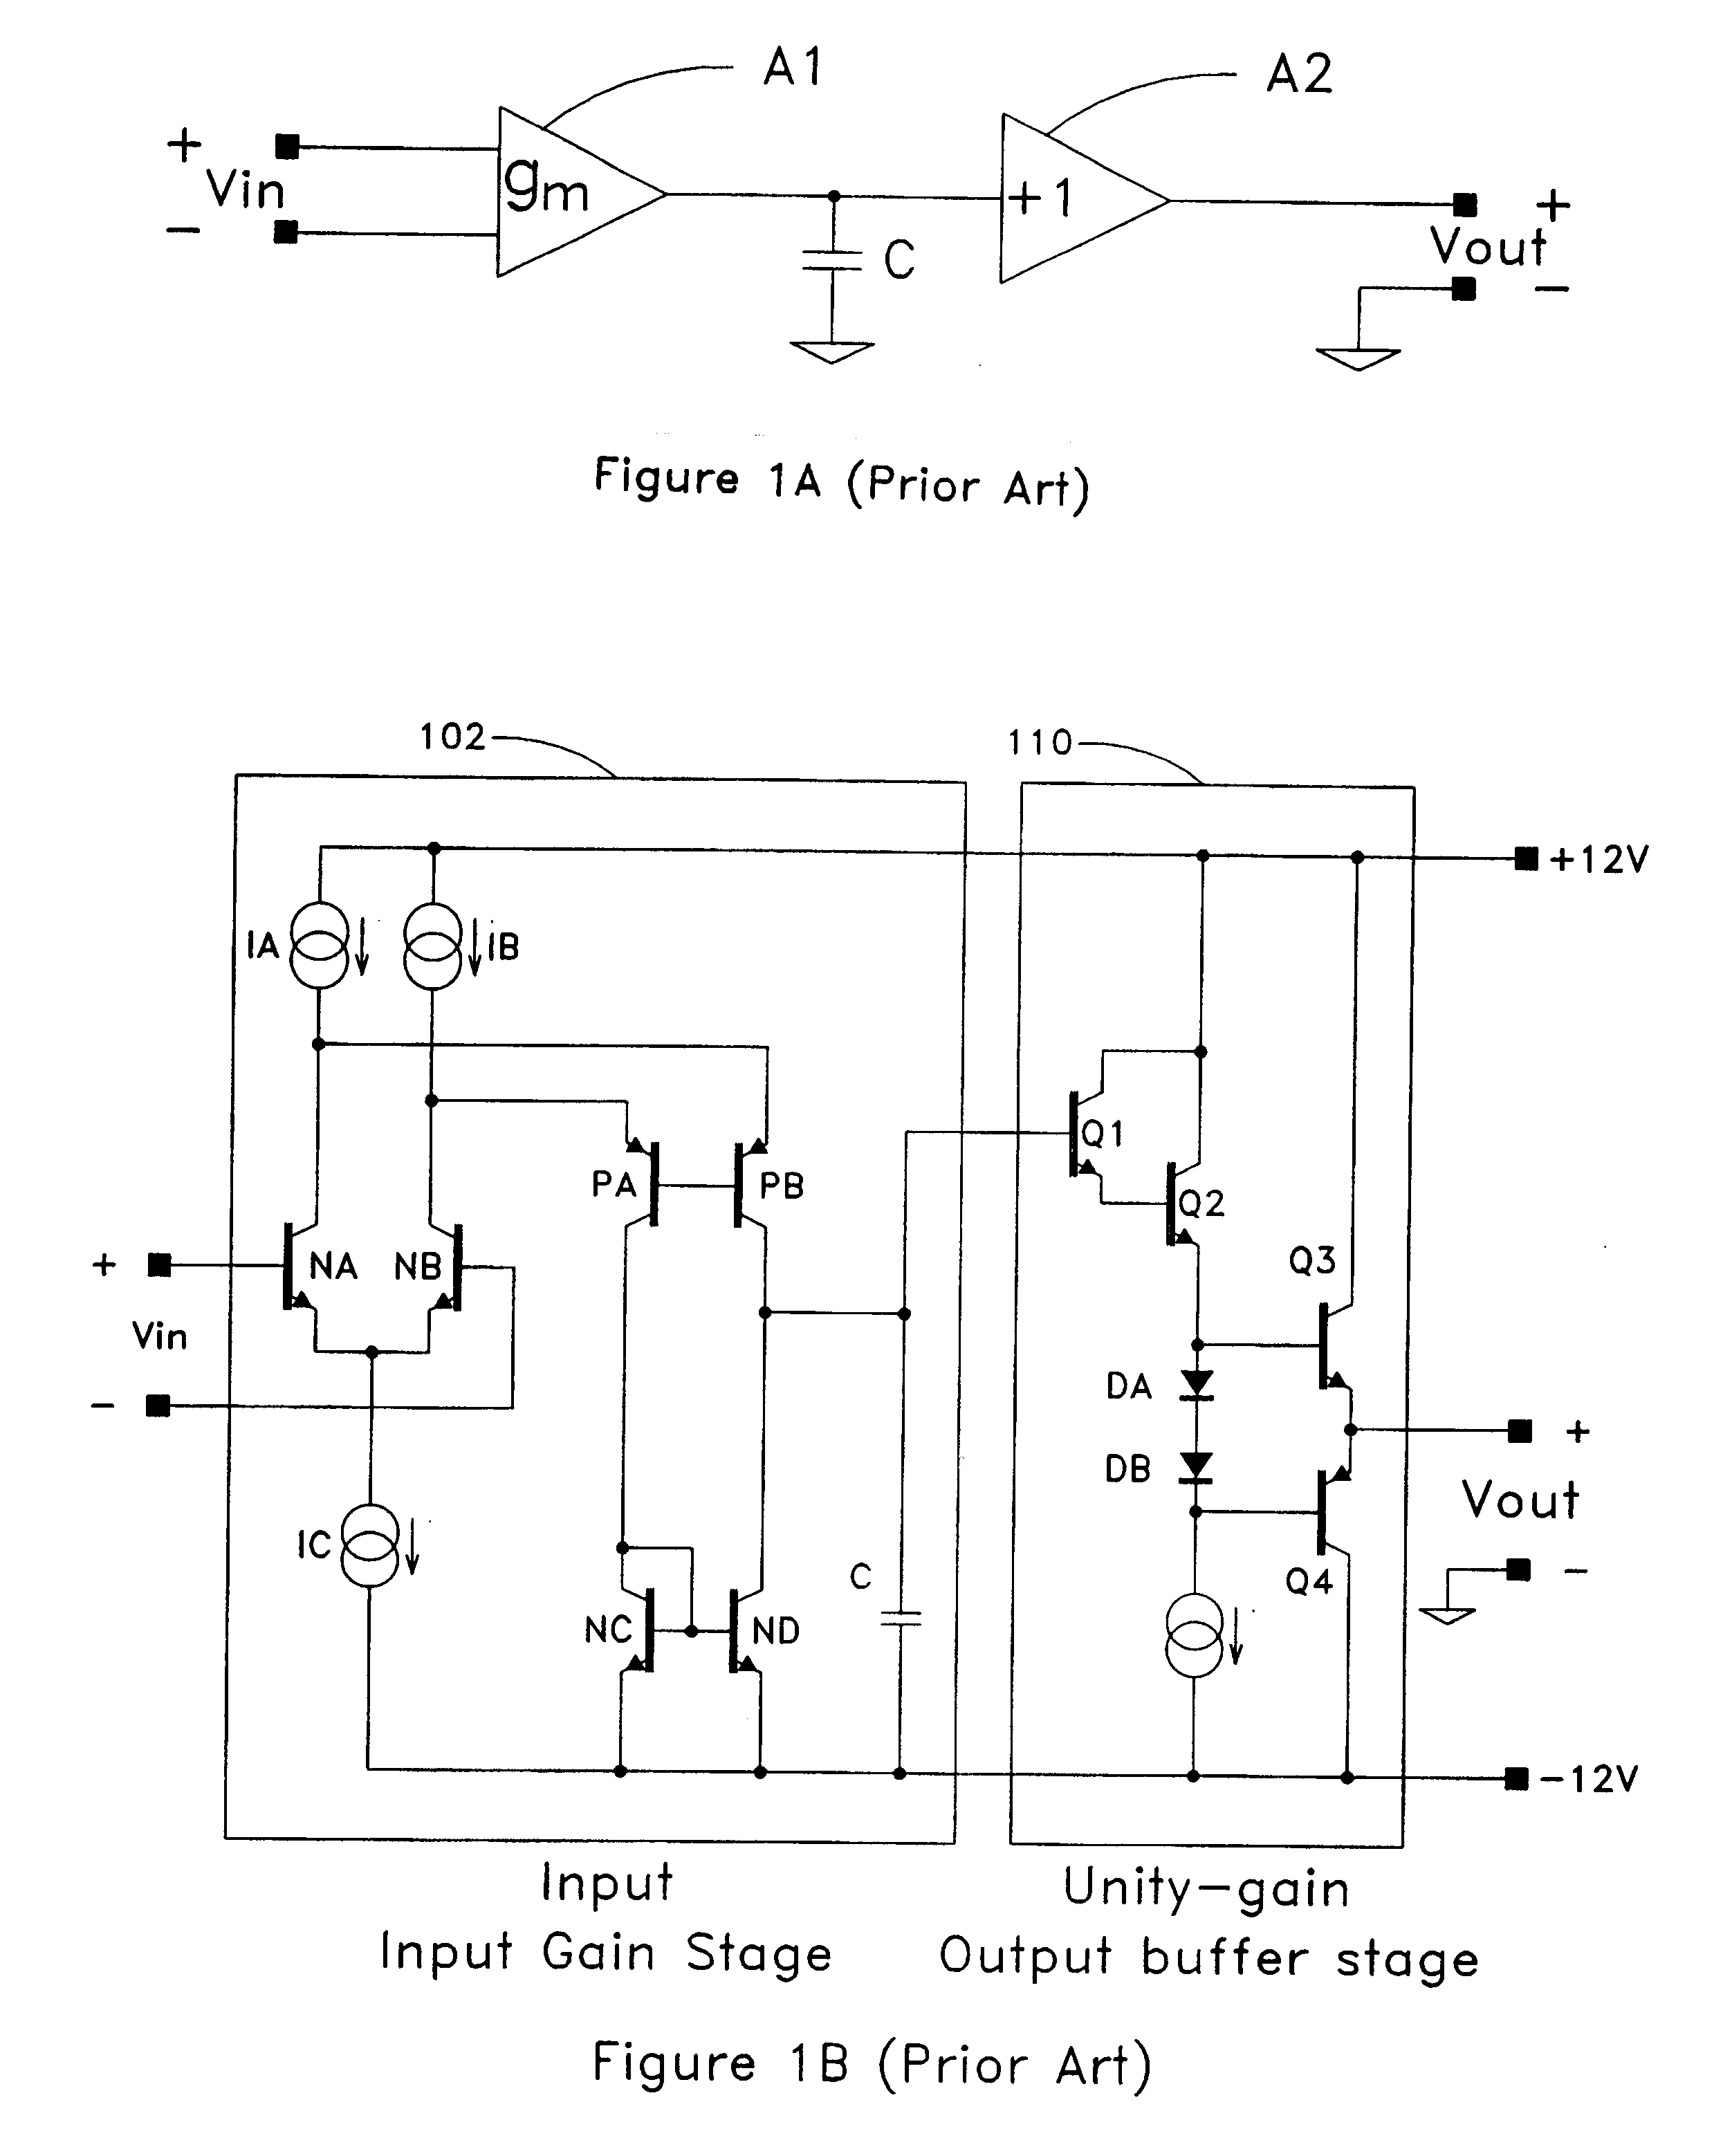 Multiple-voltage supply power amplifier with dynamic headroom control